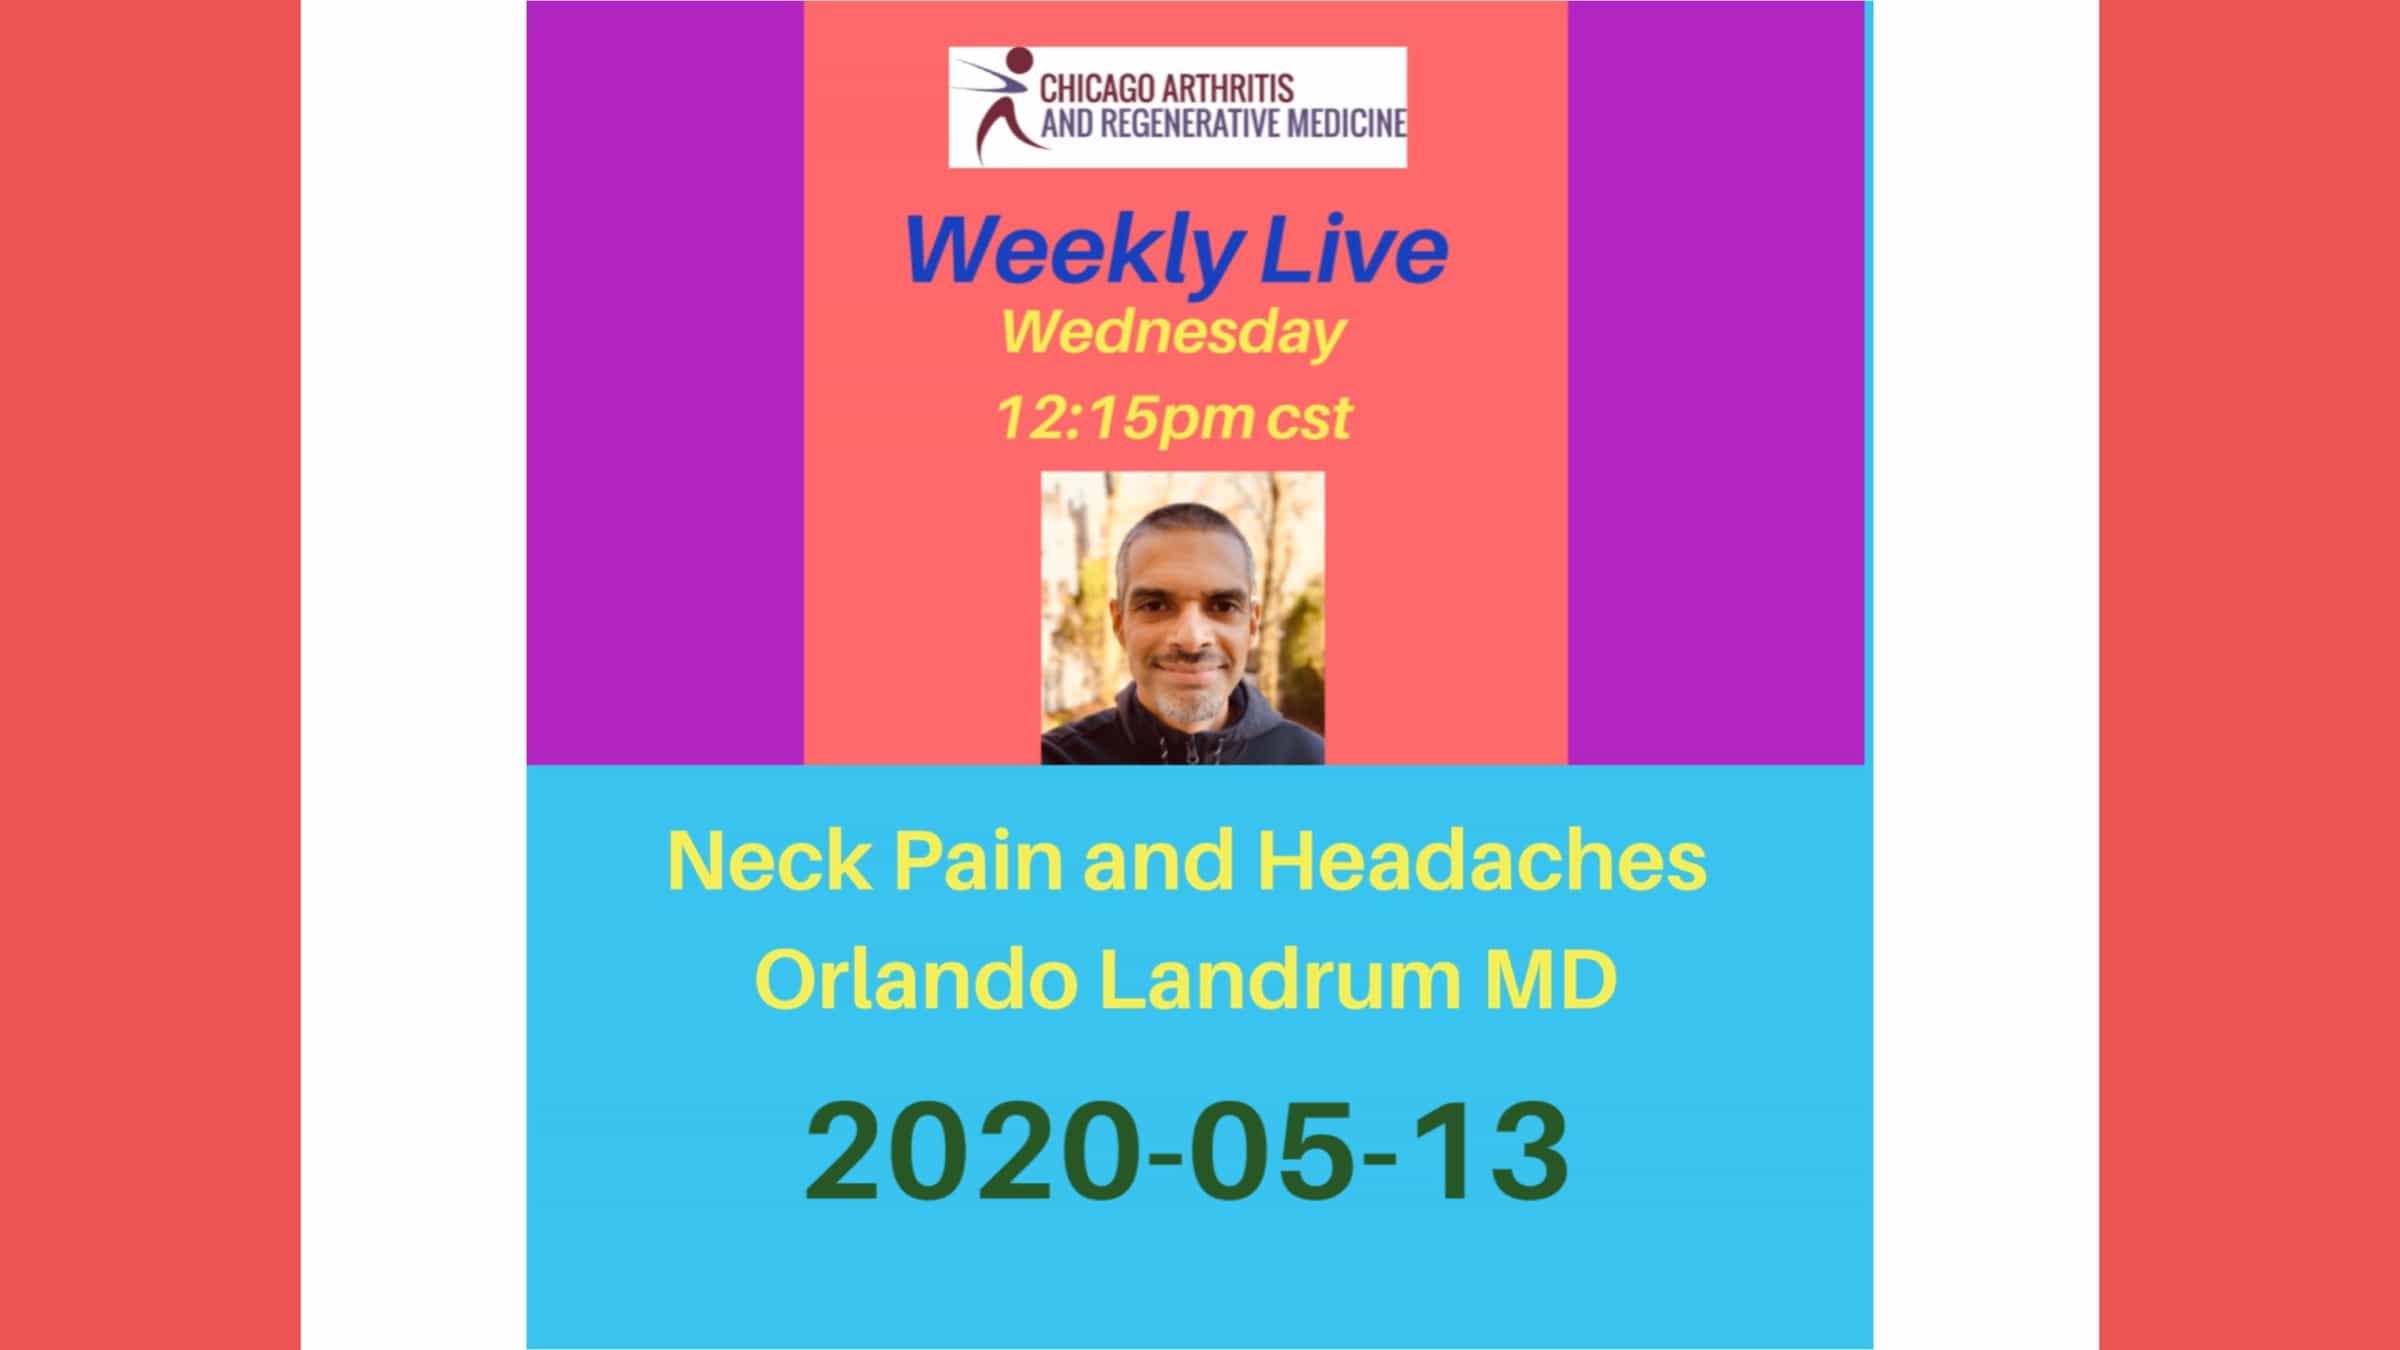 Upcoming Weekly Live- 20200513- Neck Pain and Headaches